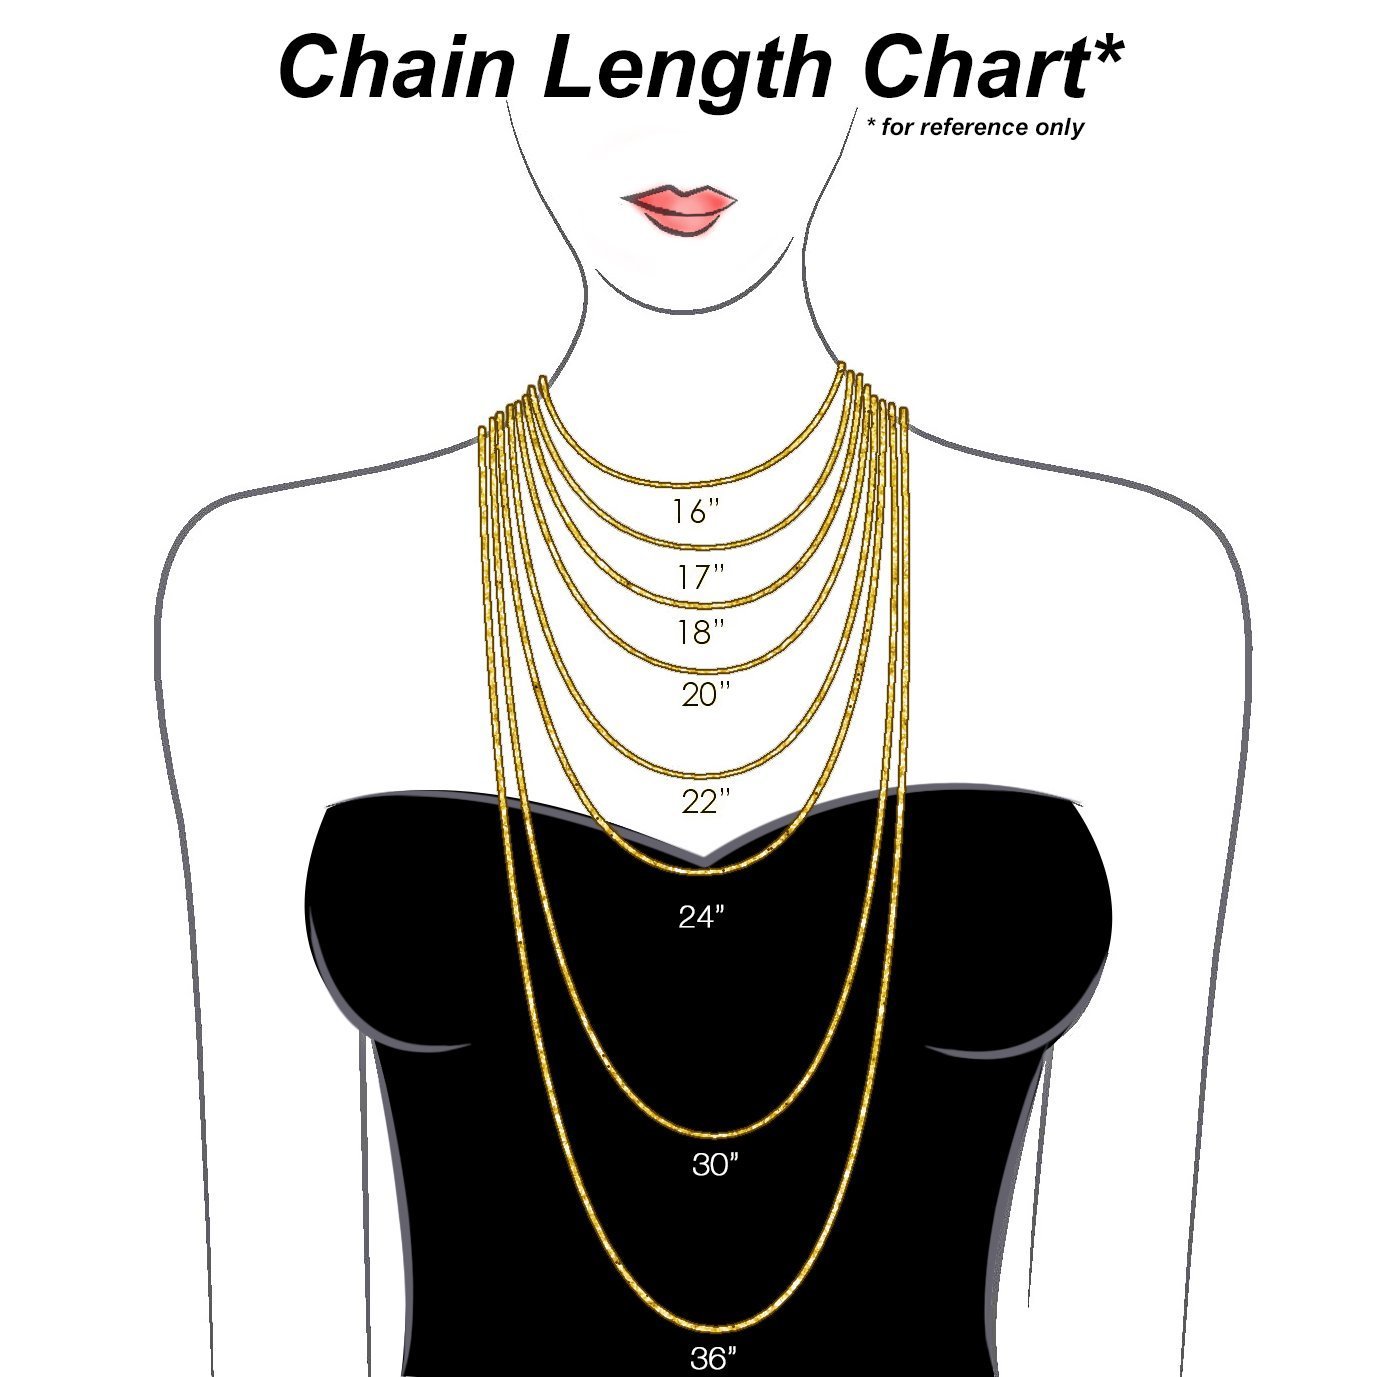 Necklace Size Chart - Choosing the Right Necklace Length